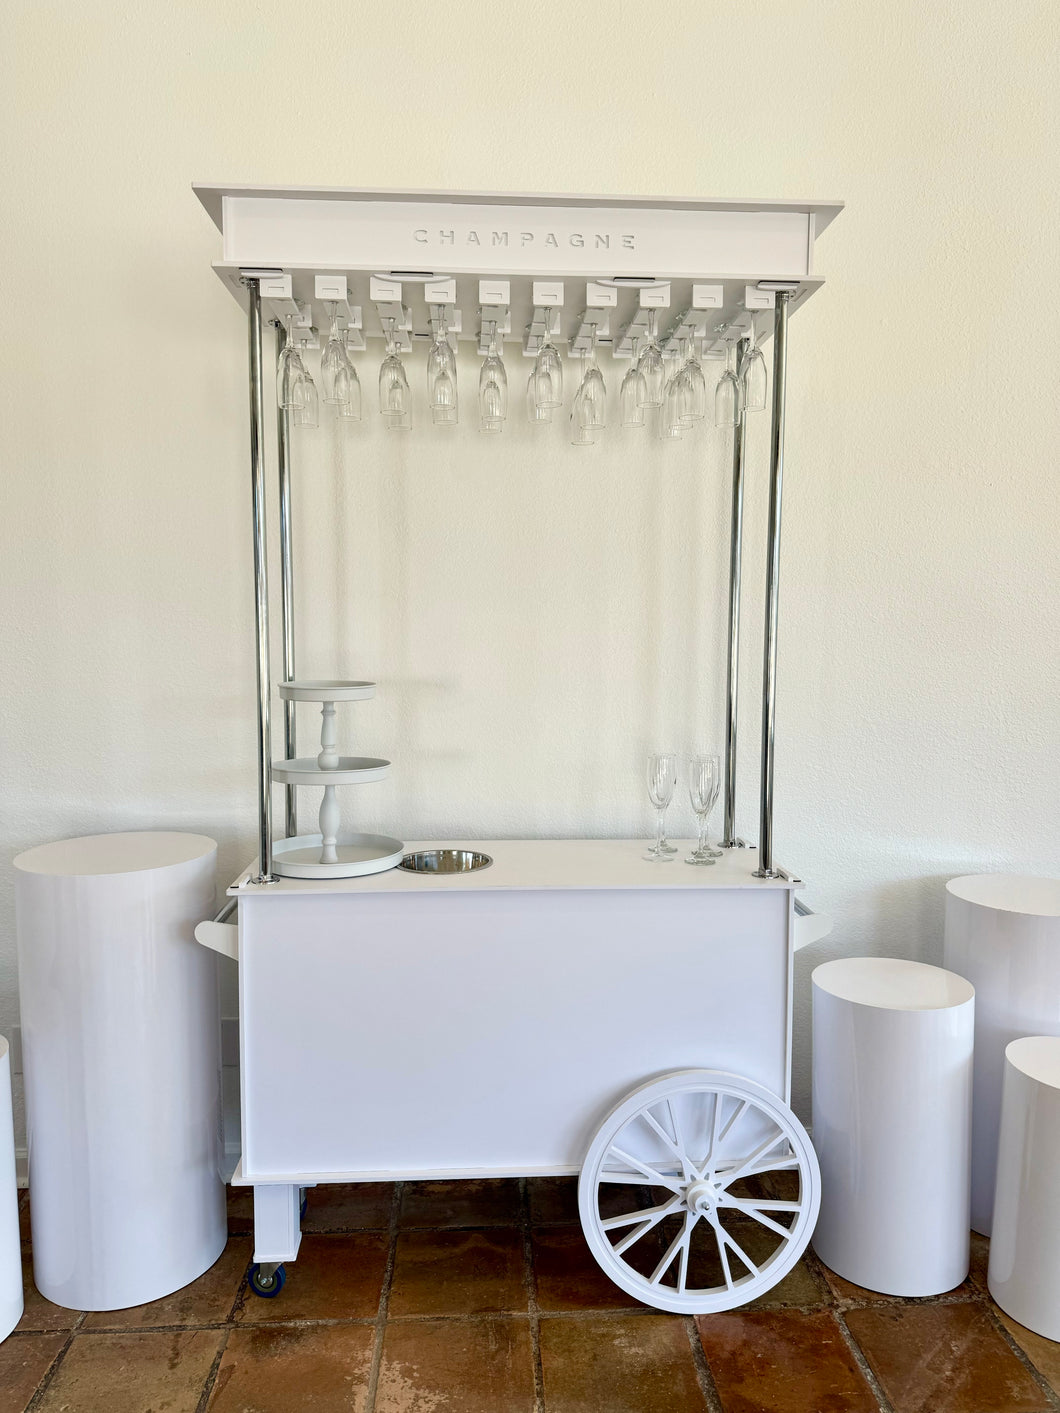 The Champagne Cart